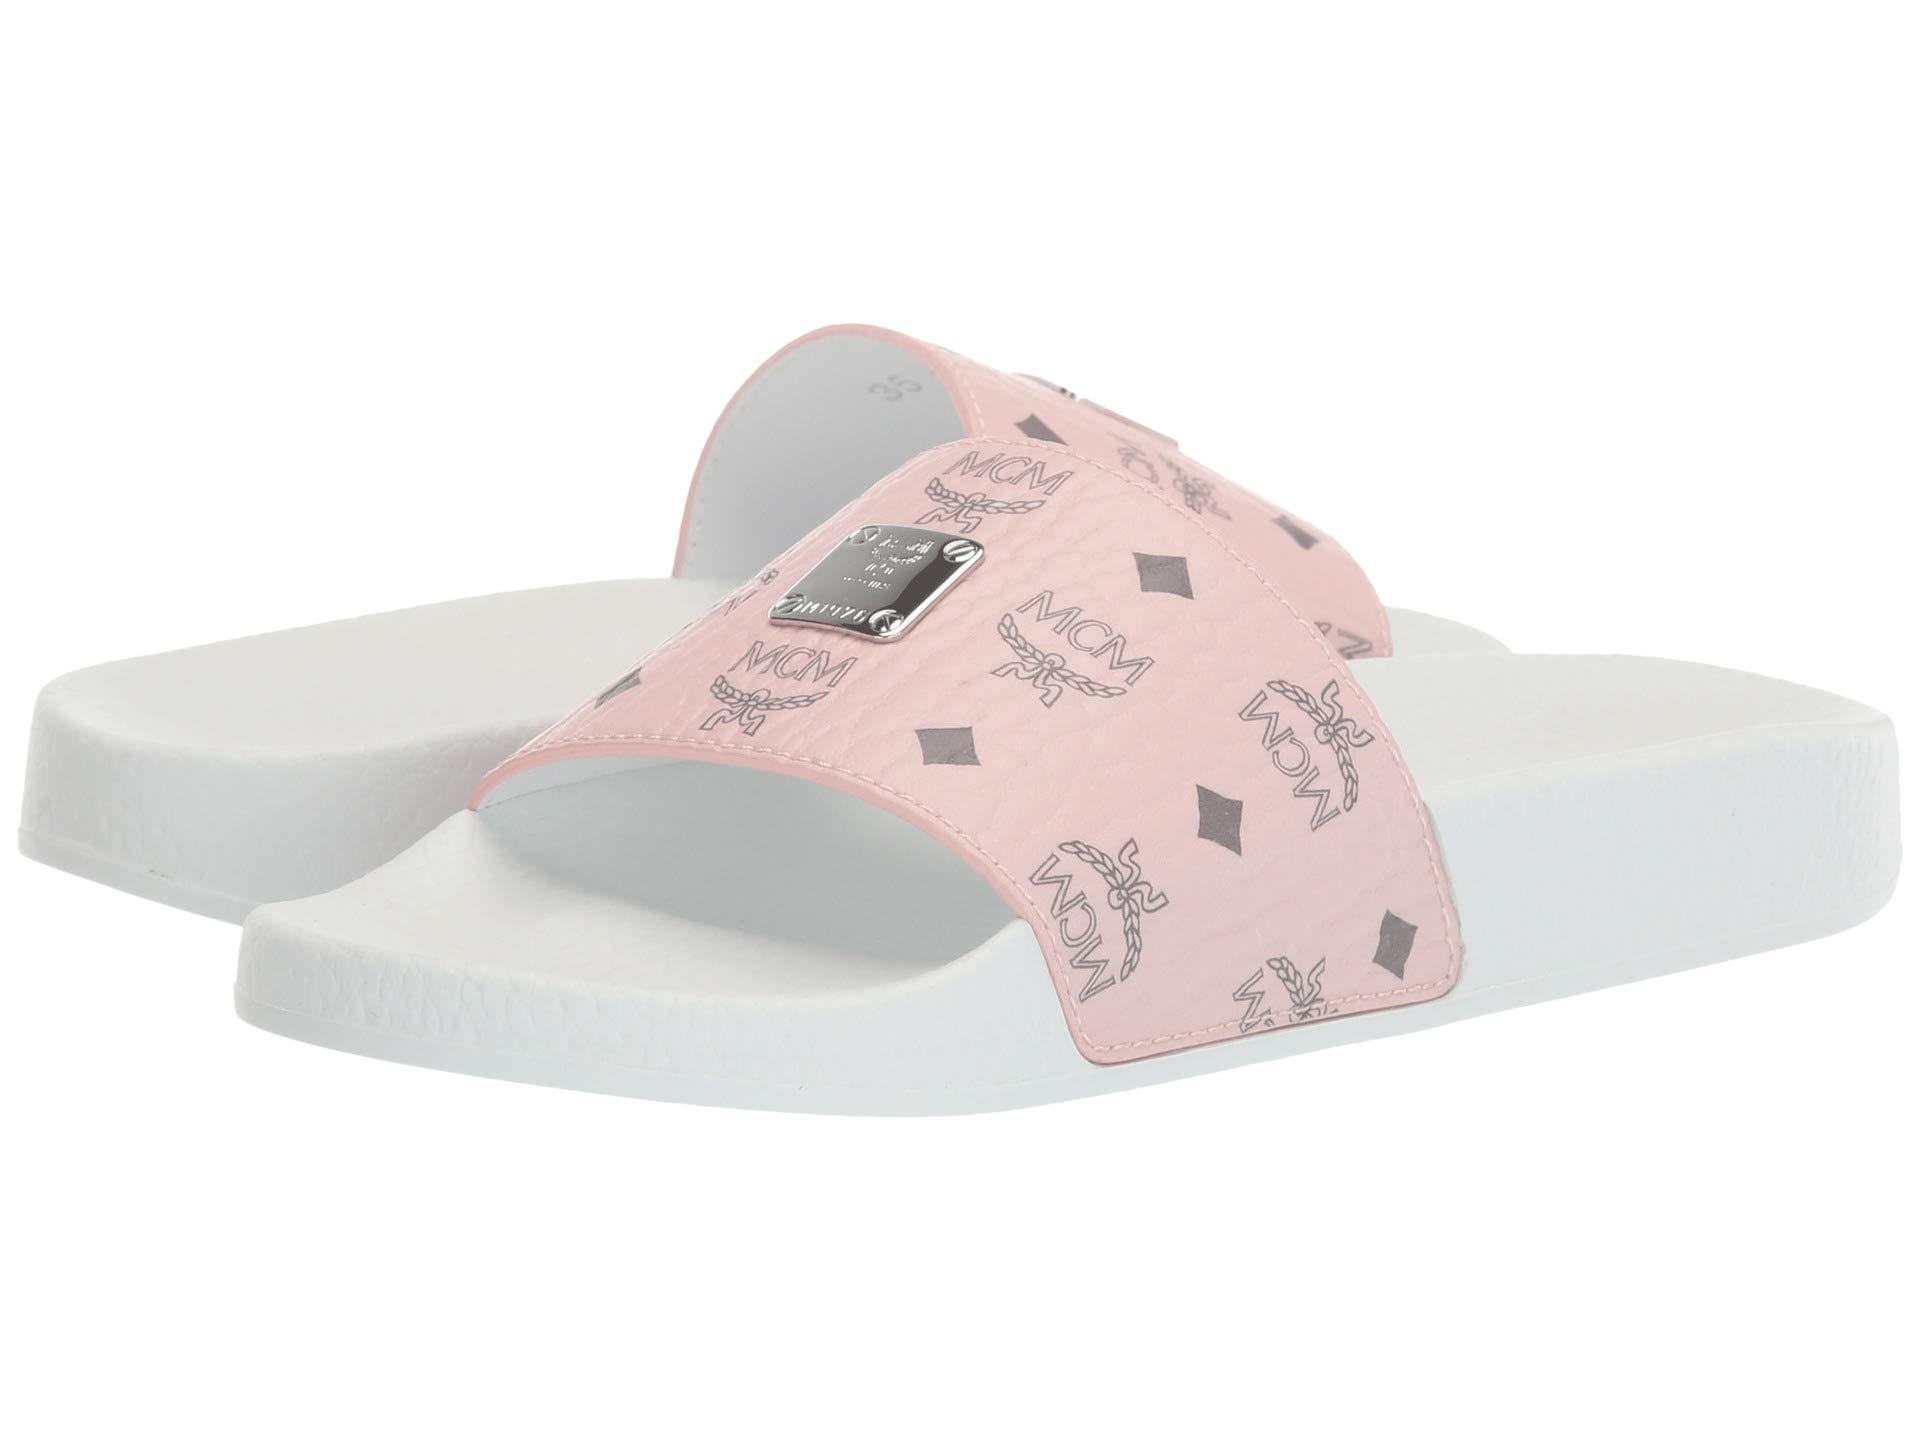 Mcm Pink Slides - White circle outlined in black with upwards pointing ...